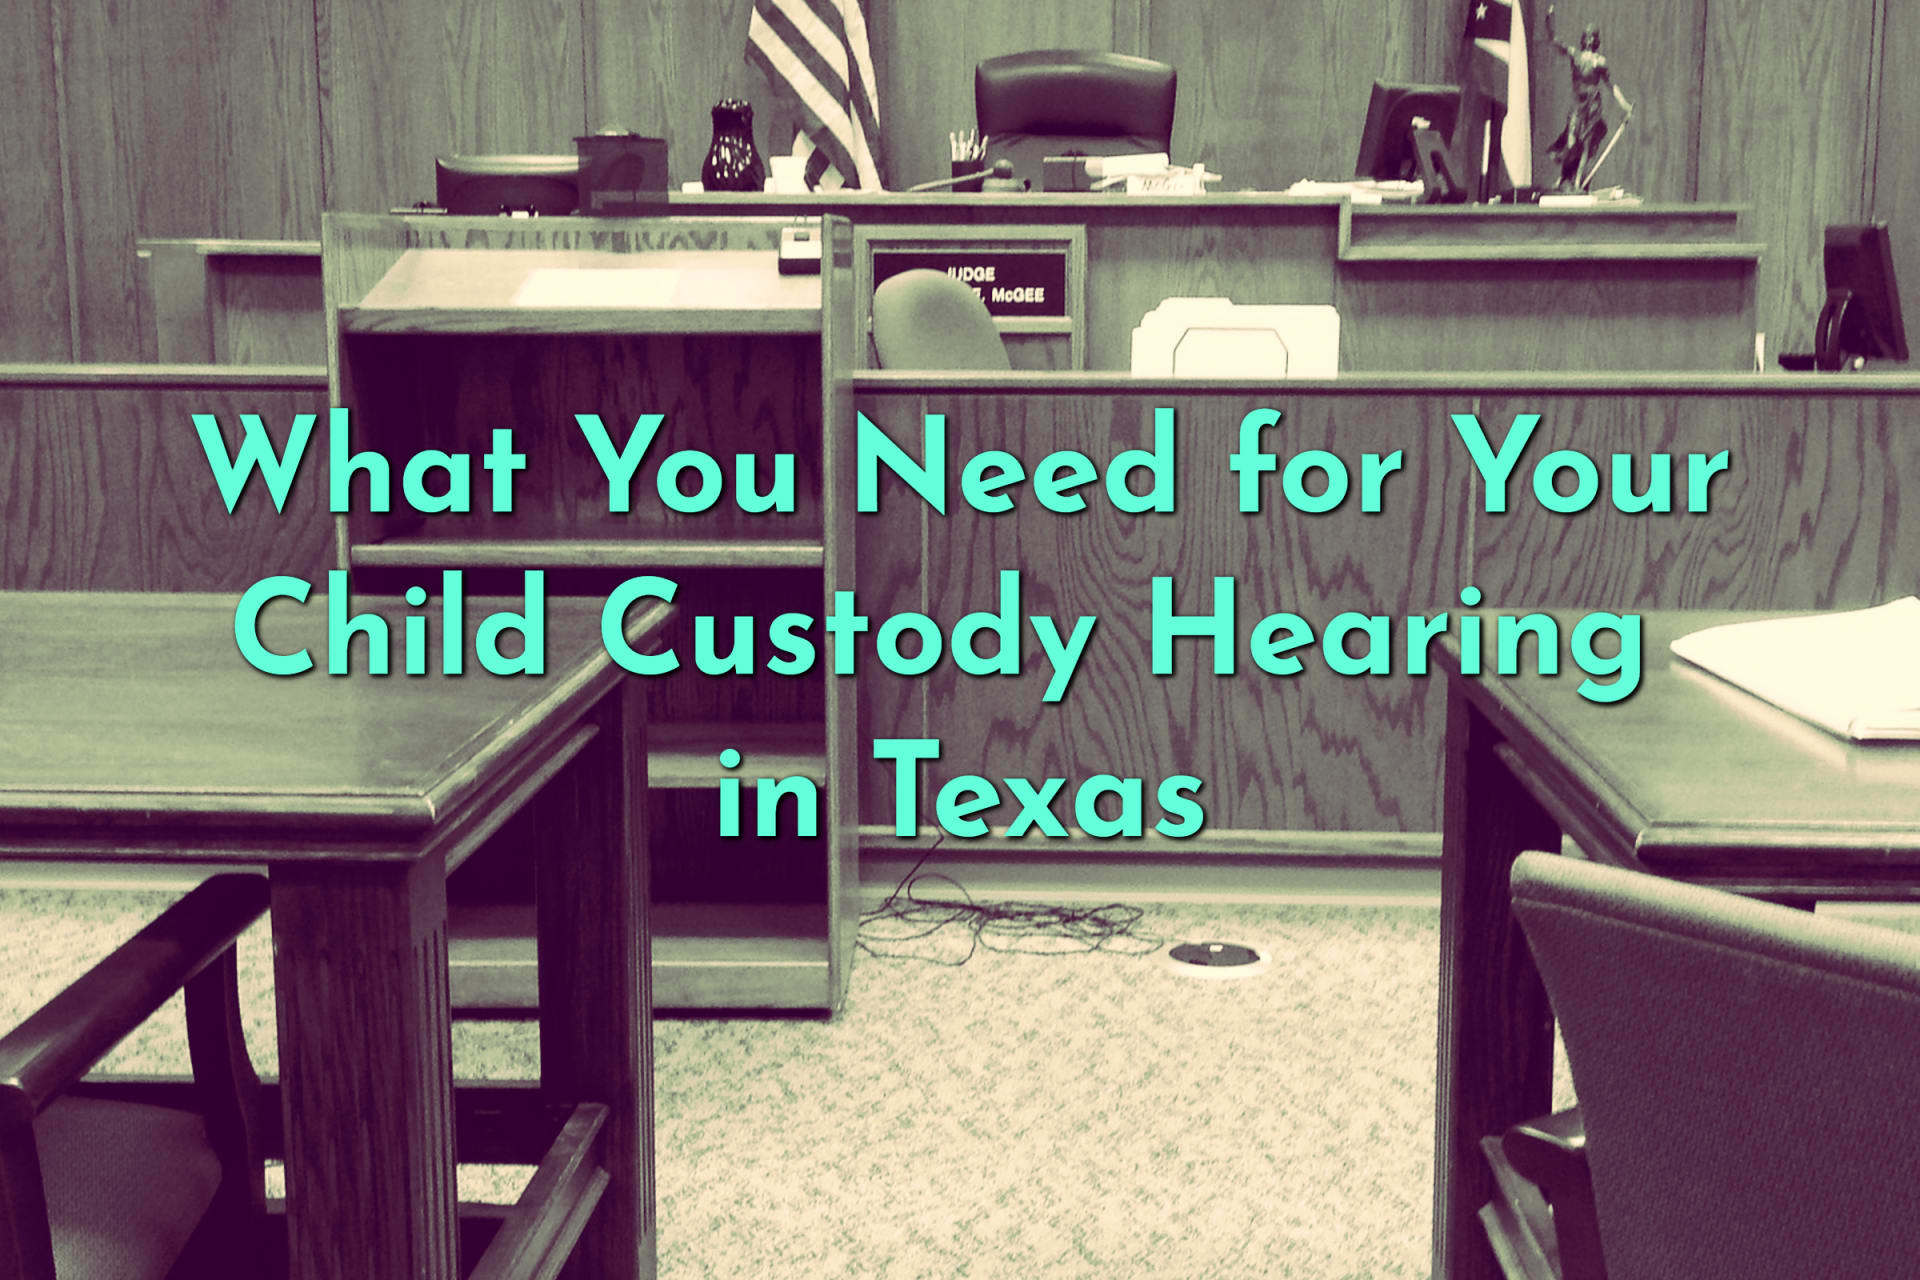 What to Bring to a Child Custody Hearing in Texas